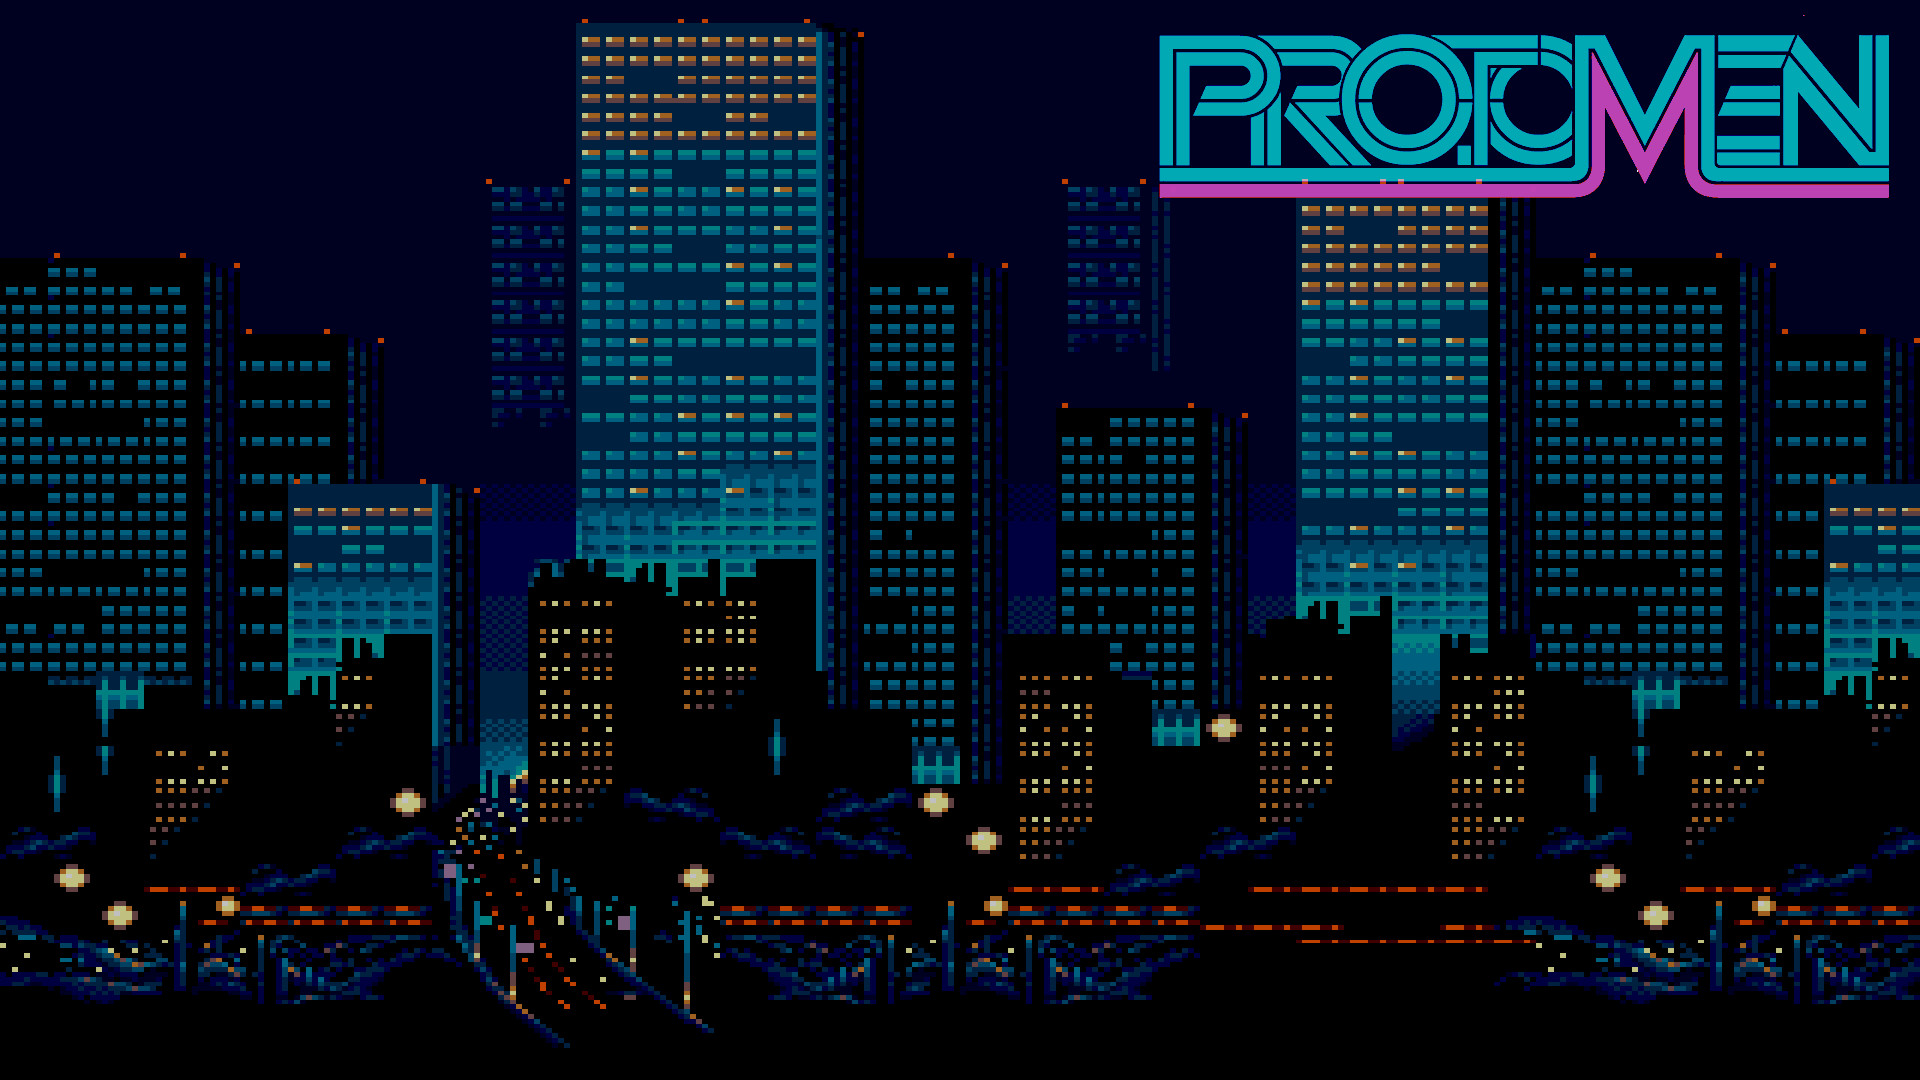 1920x1080 Unofficial Protomen wallpaper I made by mixing an existing favorite  wallpaper and the logo.